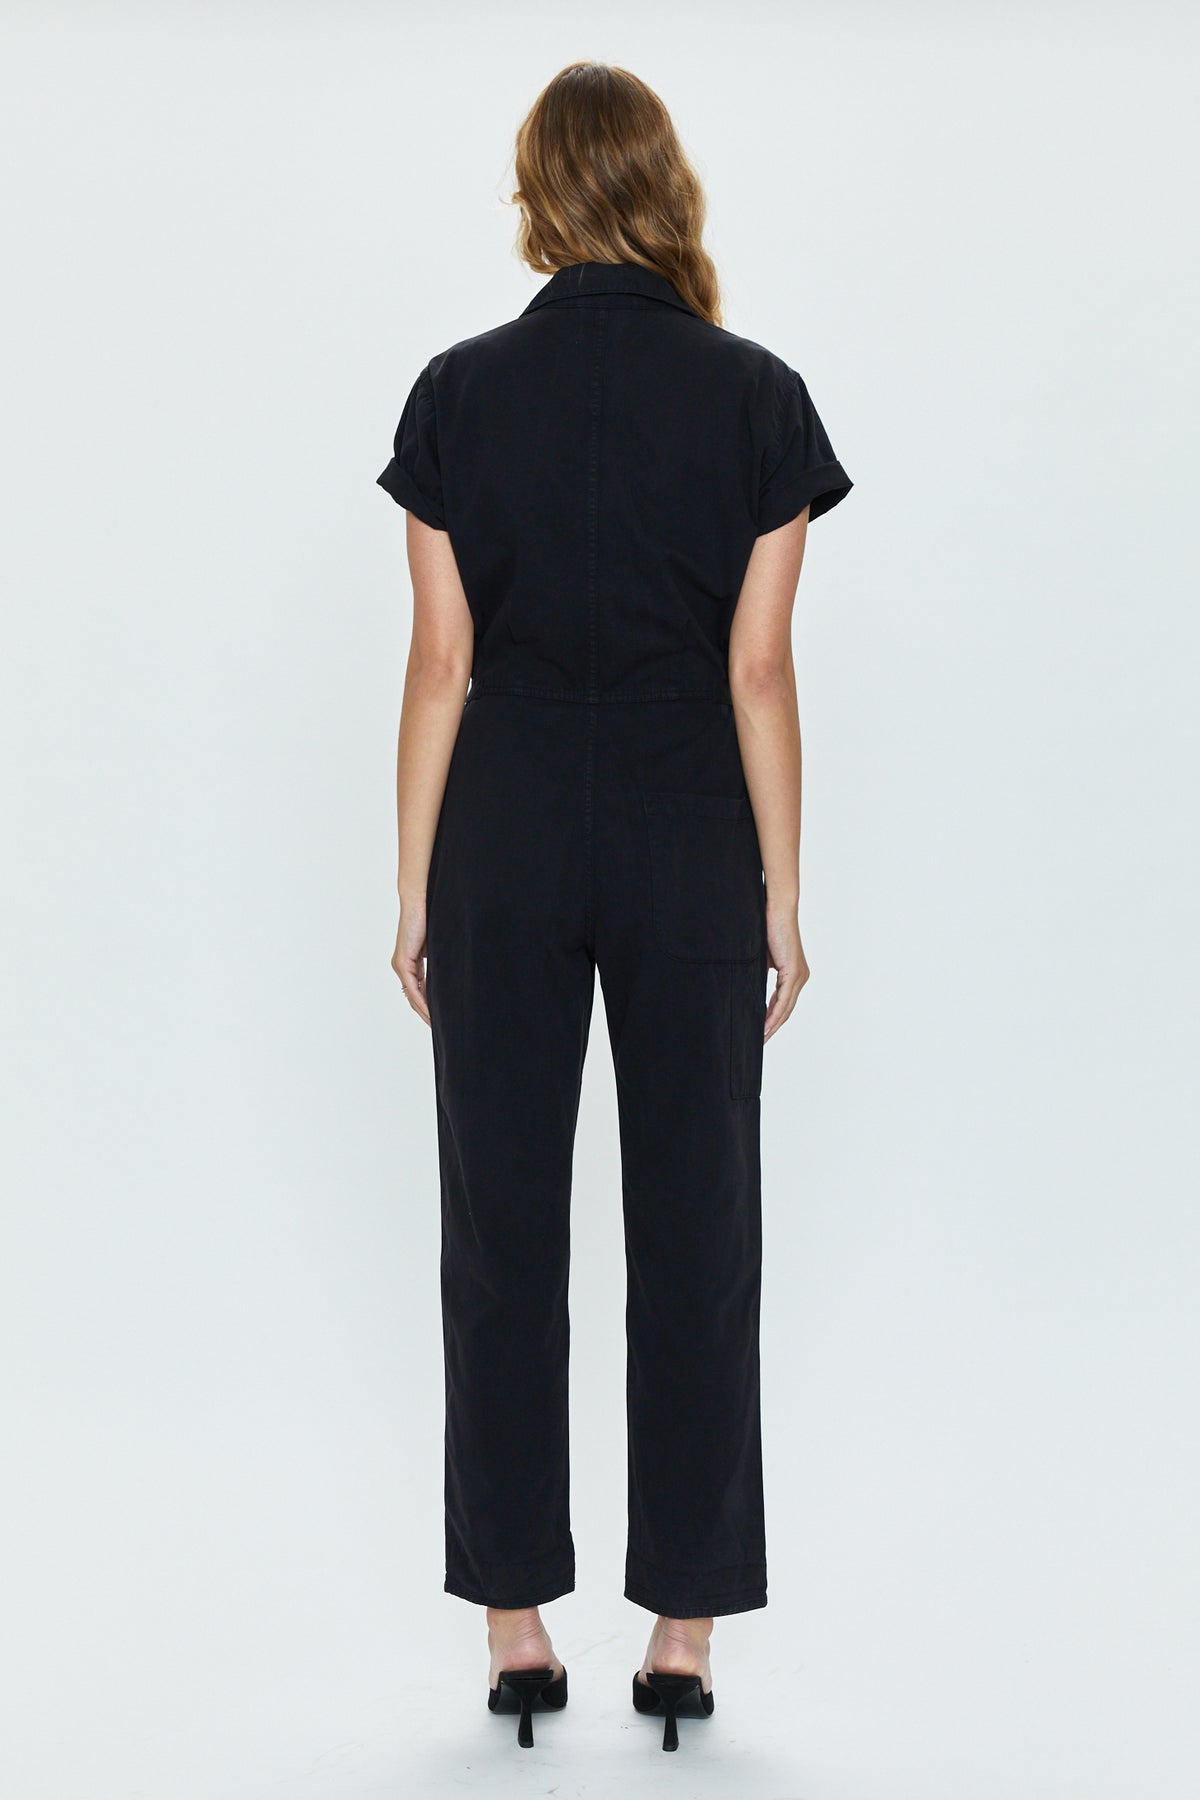 Grover Short Sleeve Field Suit - Fade To Black